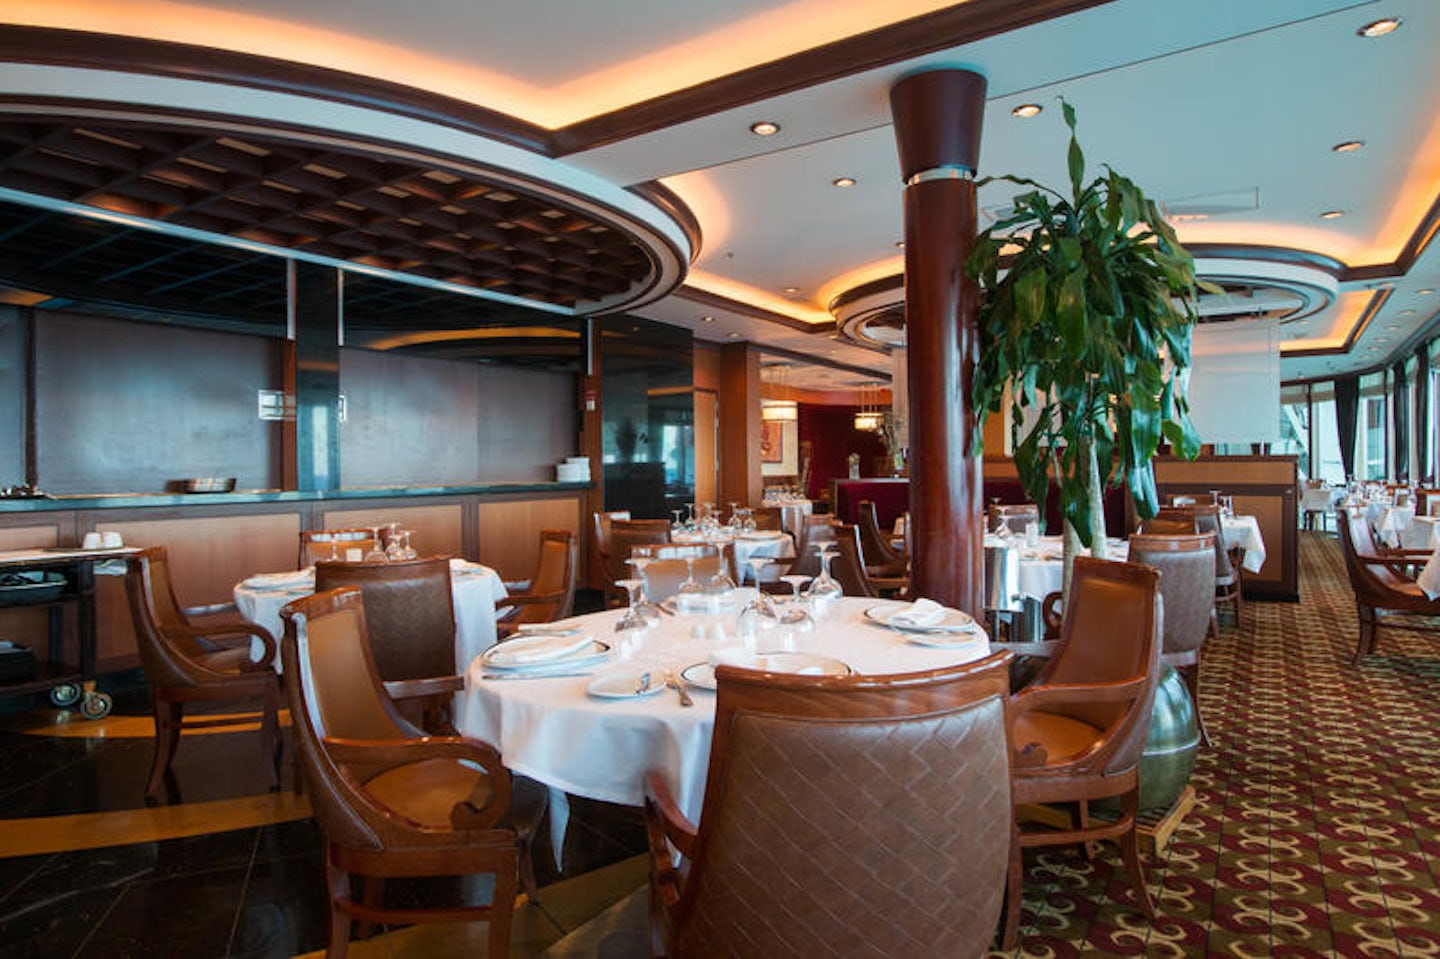 Chops Grille on Enchantment of the Seas